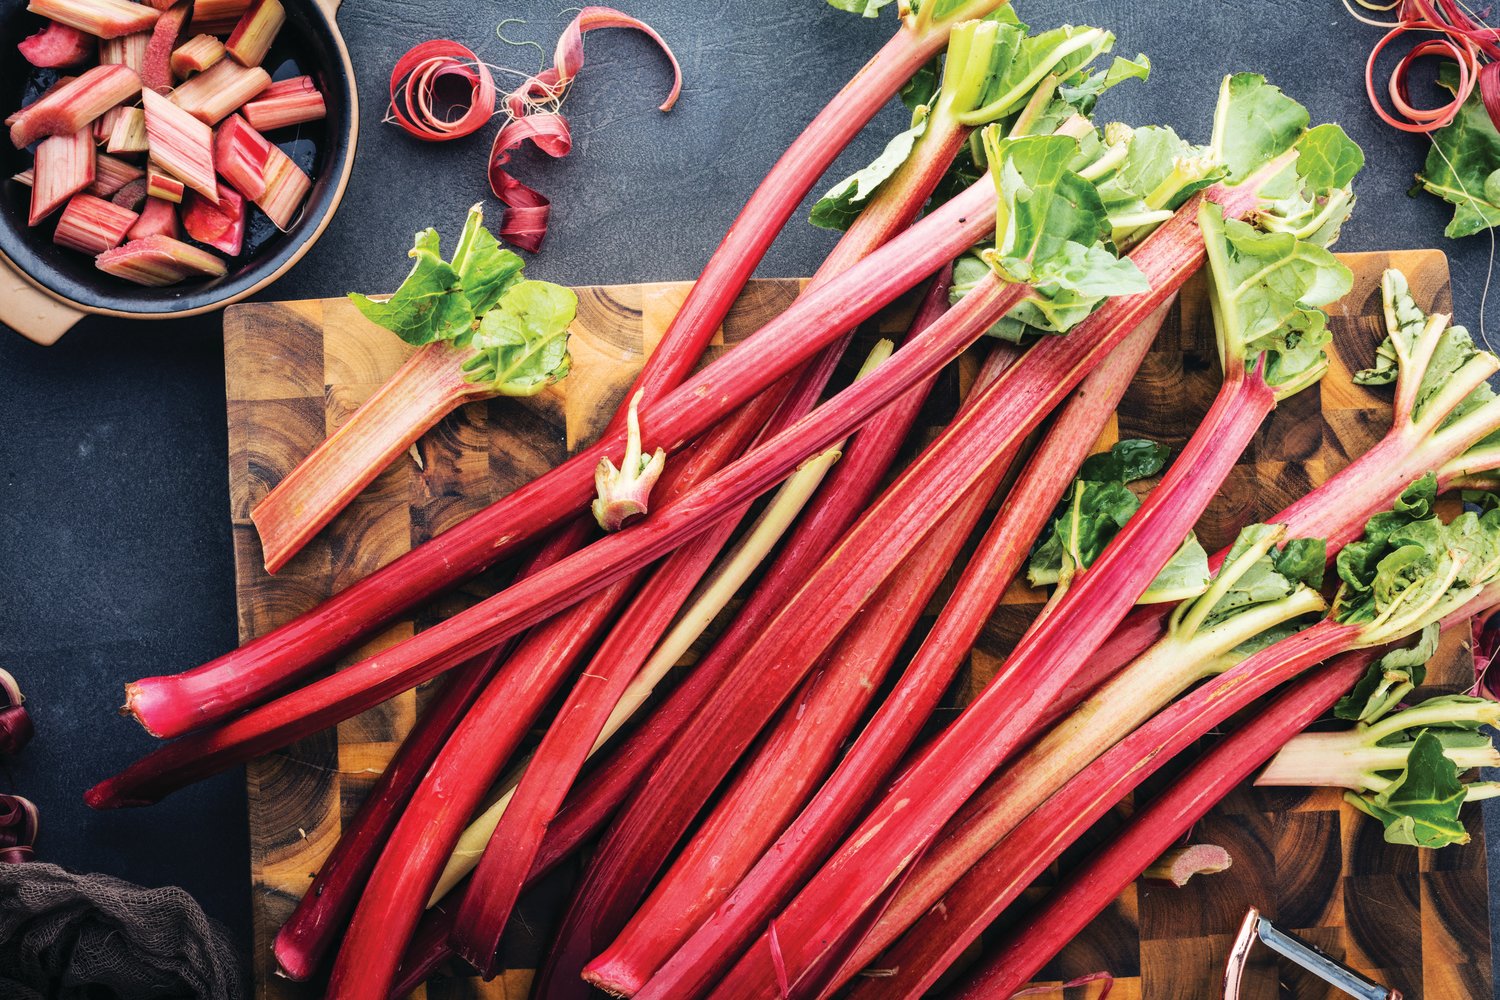 The supply of rhubarb can often outpace a chef’s supply of recipes.